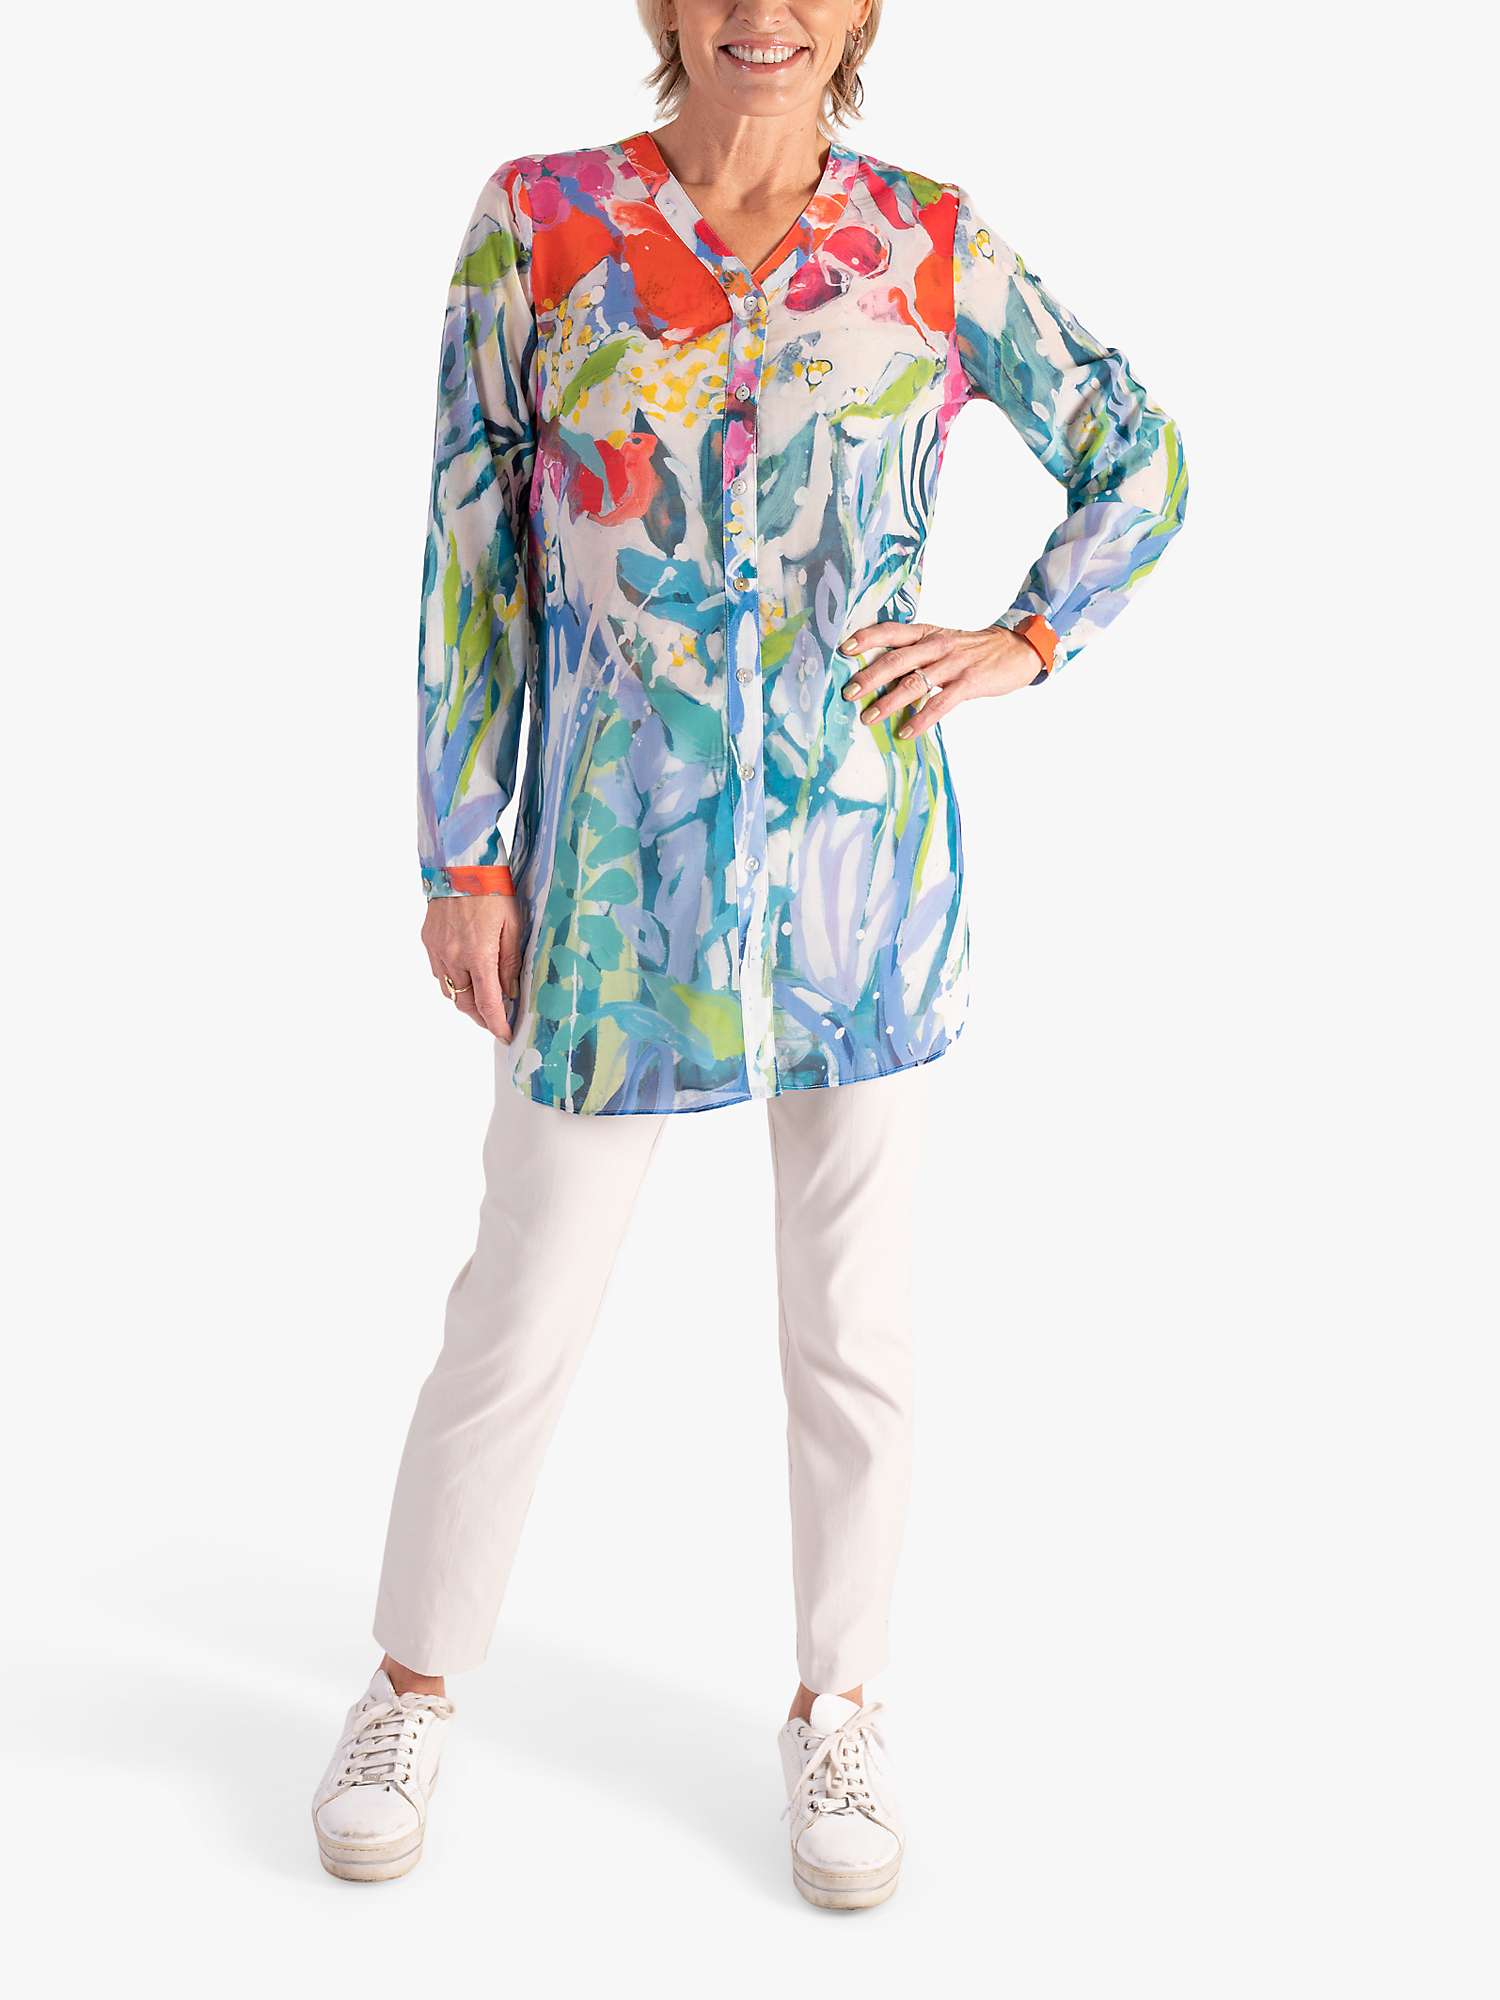 Buy chesca Abstract Spring Flowers Print Chiffon Shirt, Blue/Multi Online at johnlewis.com